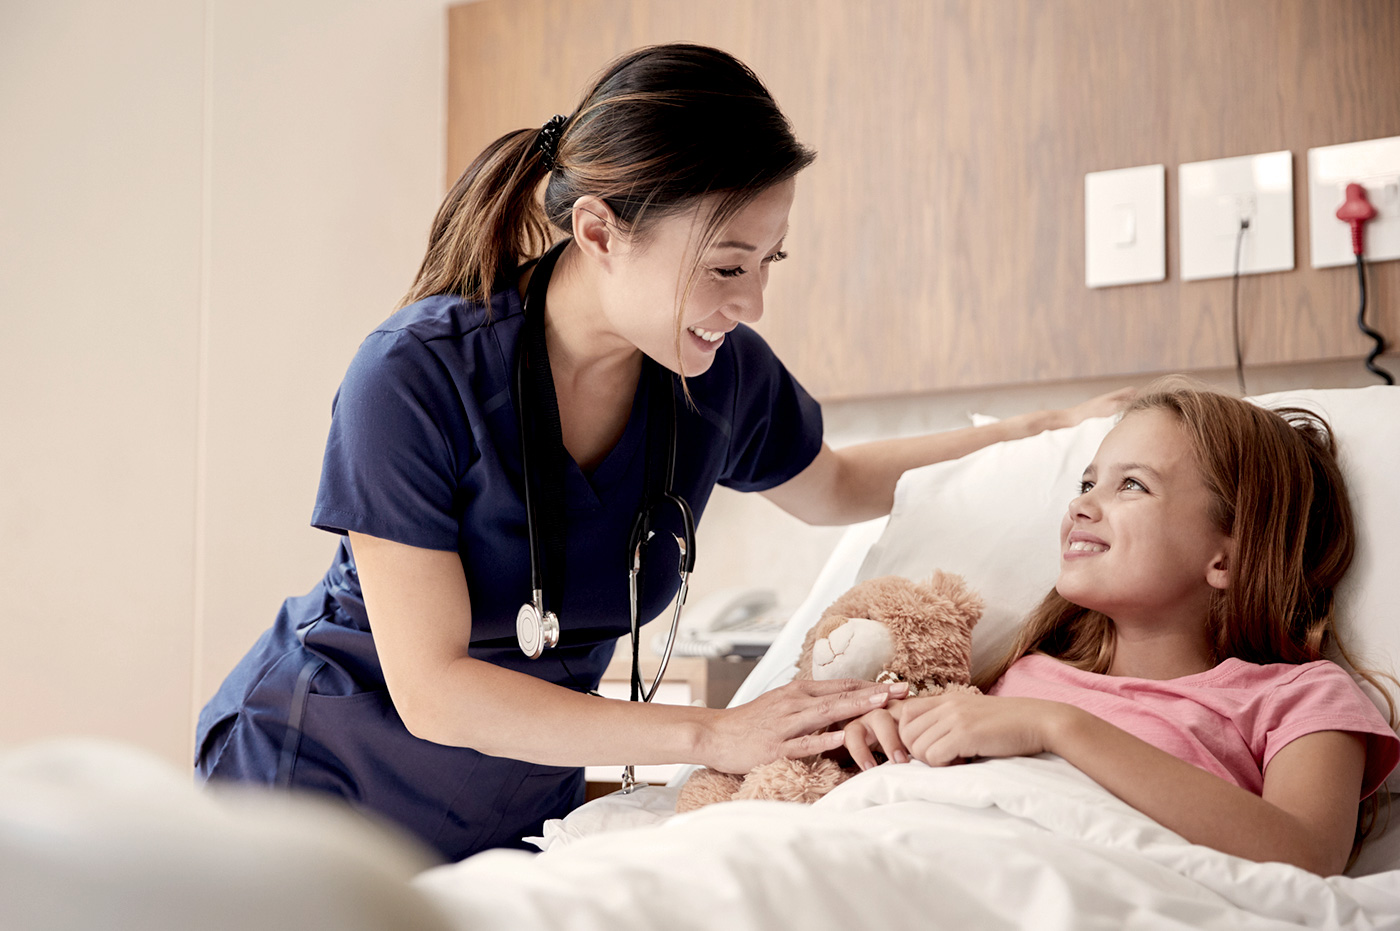 Female healthcare worker treating a little girl patient.